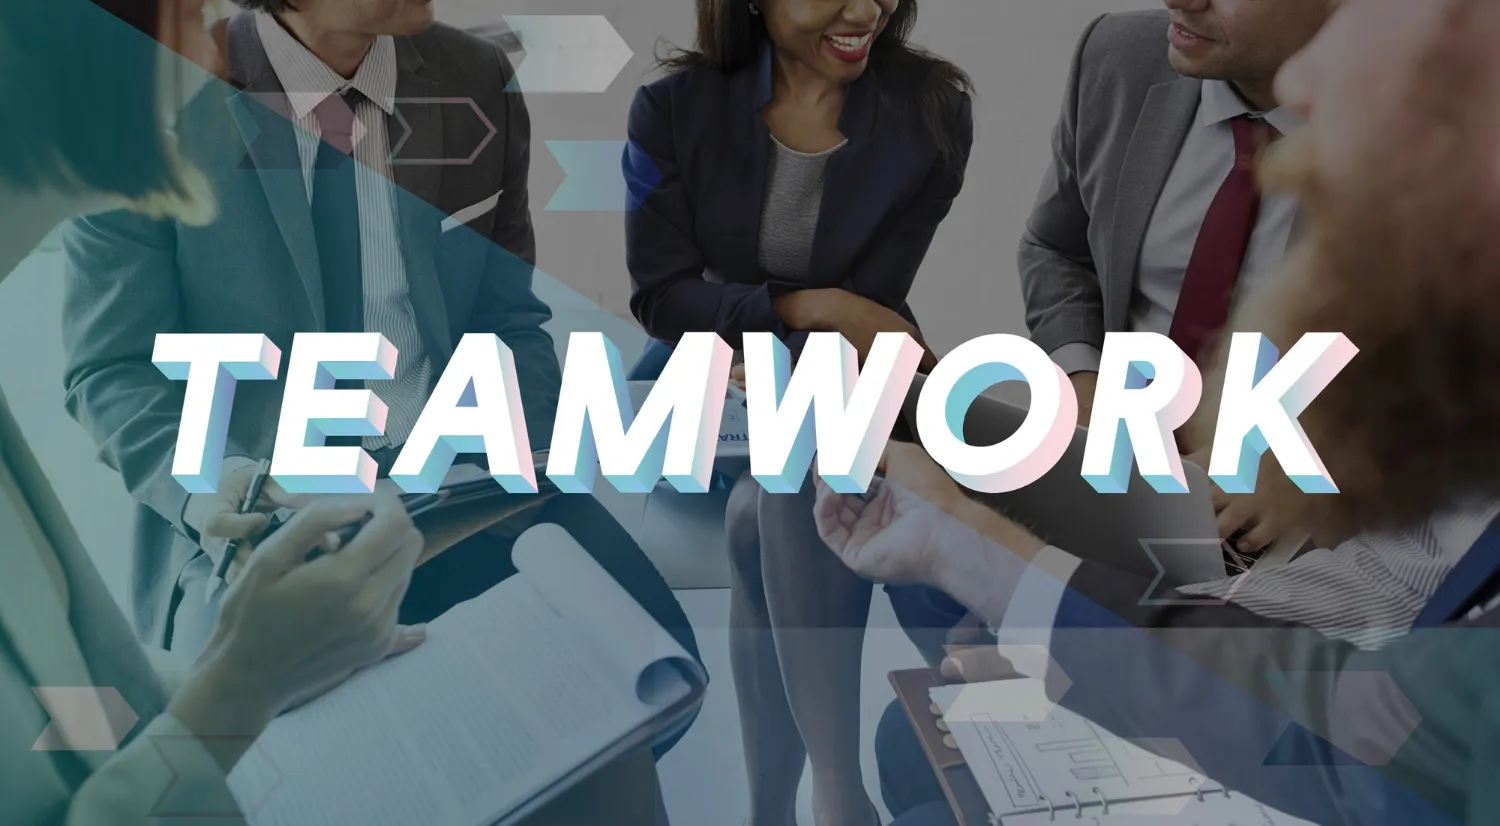 Image of a diverse group of professionals engaged in a team meeting, overlaid with the word 'TEAMWORK' in bold, symbolizing the focus on collaborative team structures as discussed in JOH Partners' blog.